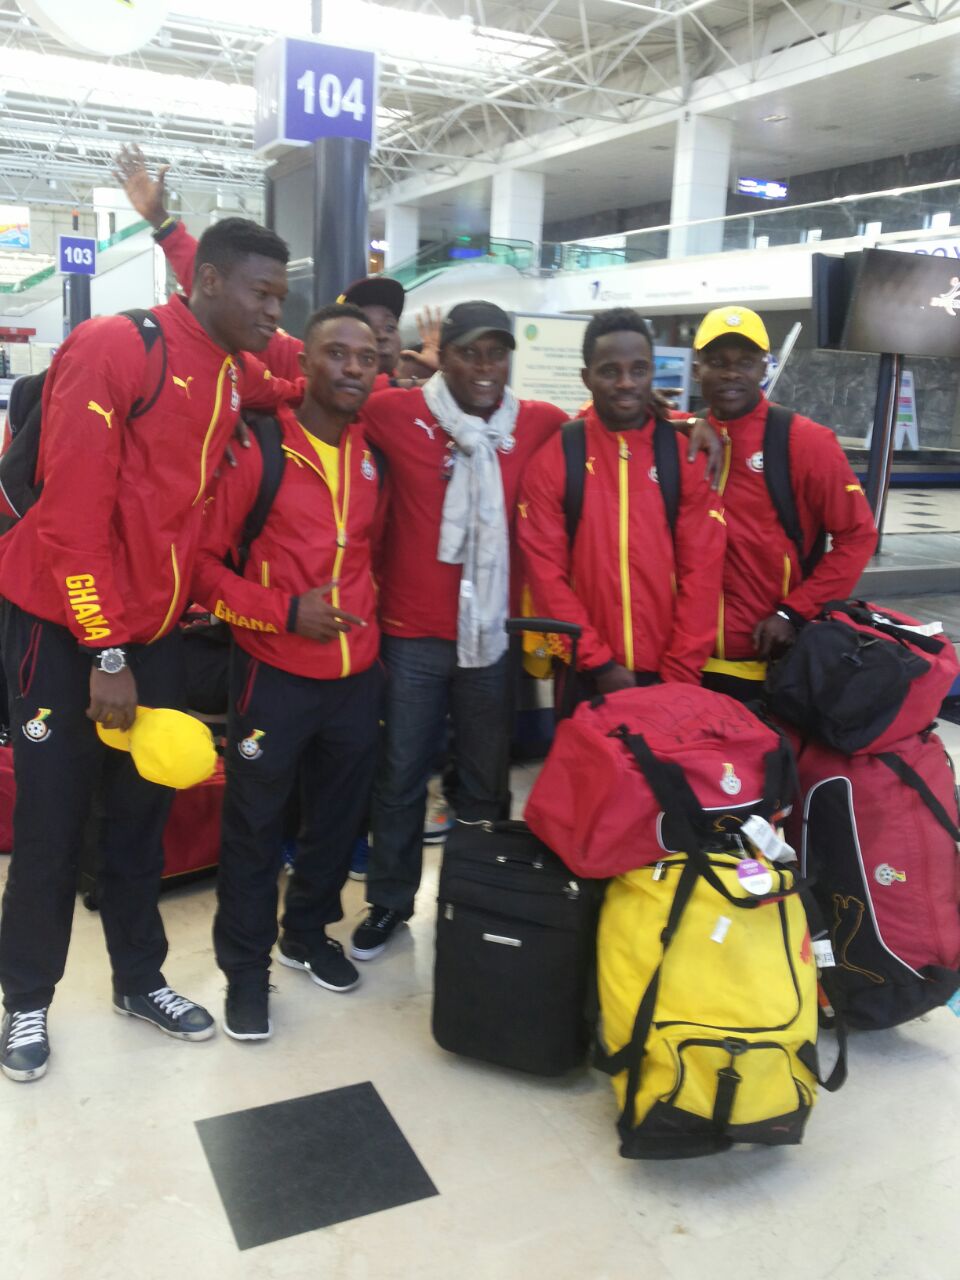 Black Satellites to arrive in Ghana on Tuesday after third place finish in Senegal